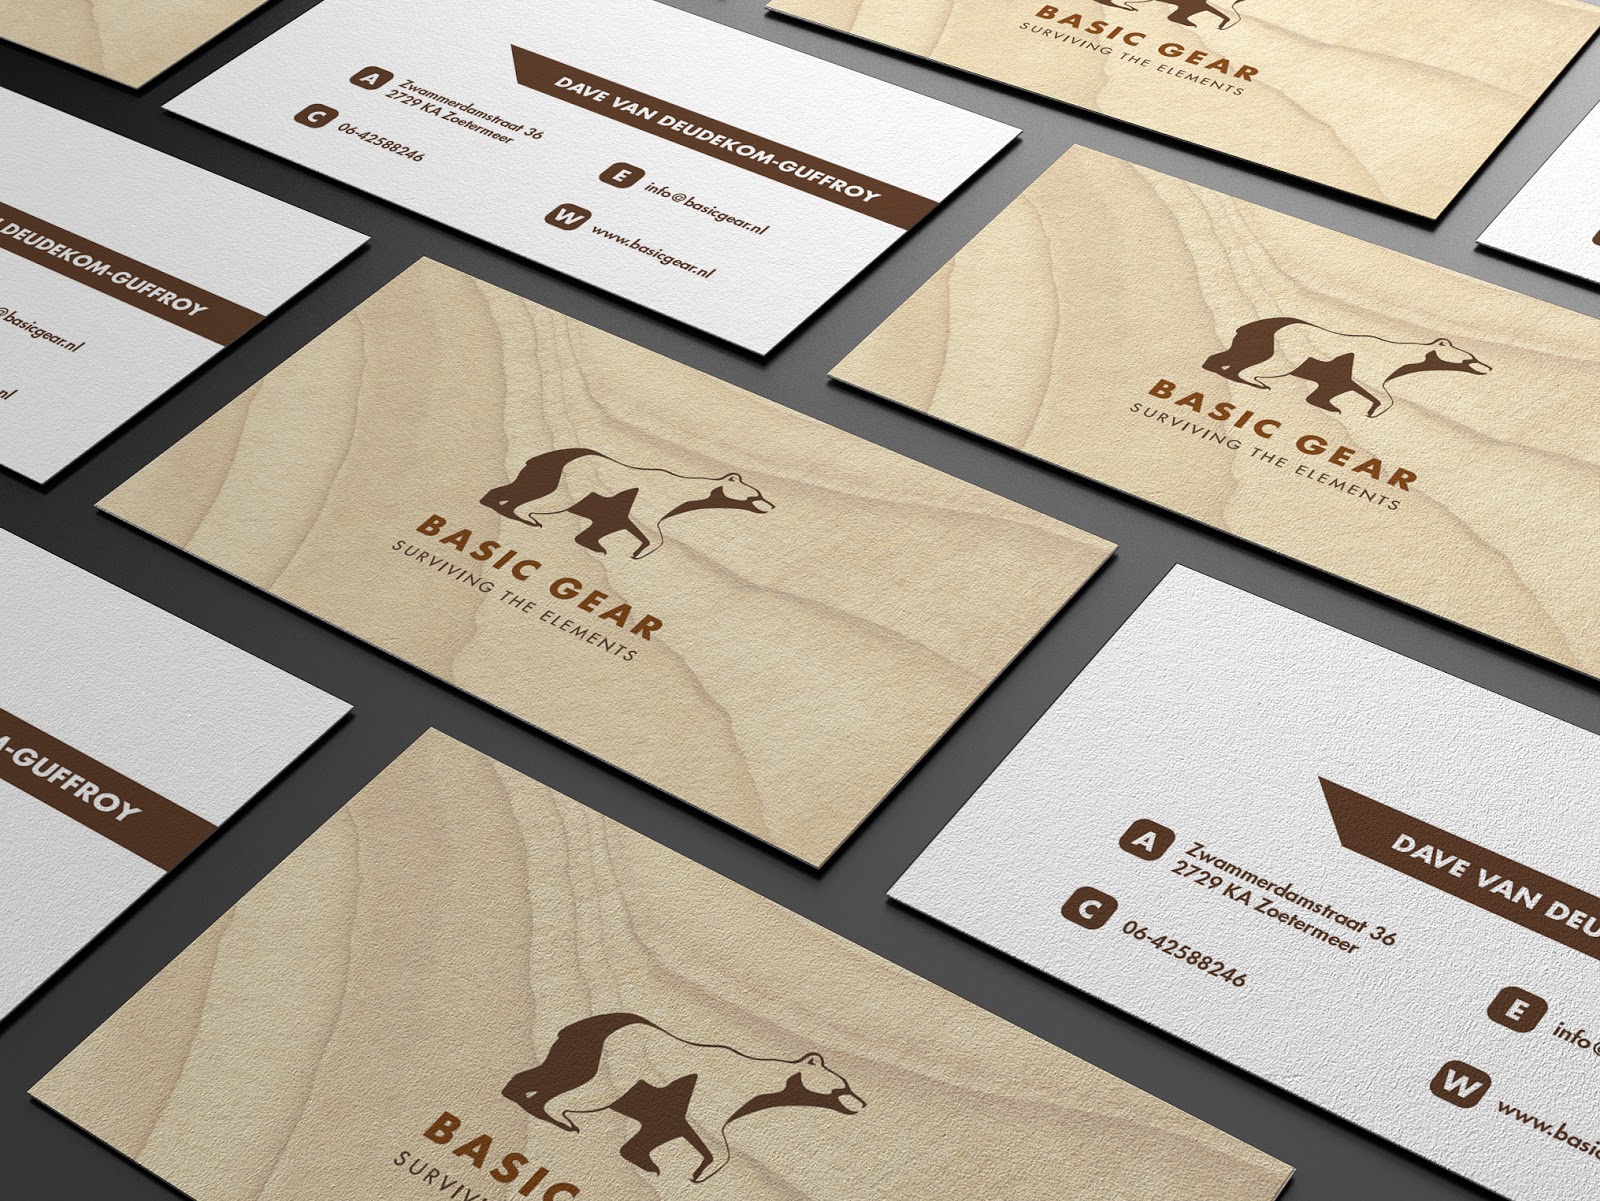 Katie Bevan: Business Cards for Basic Gear